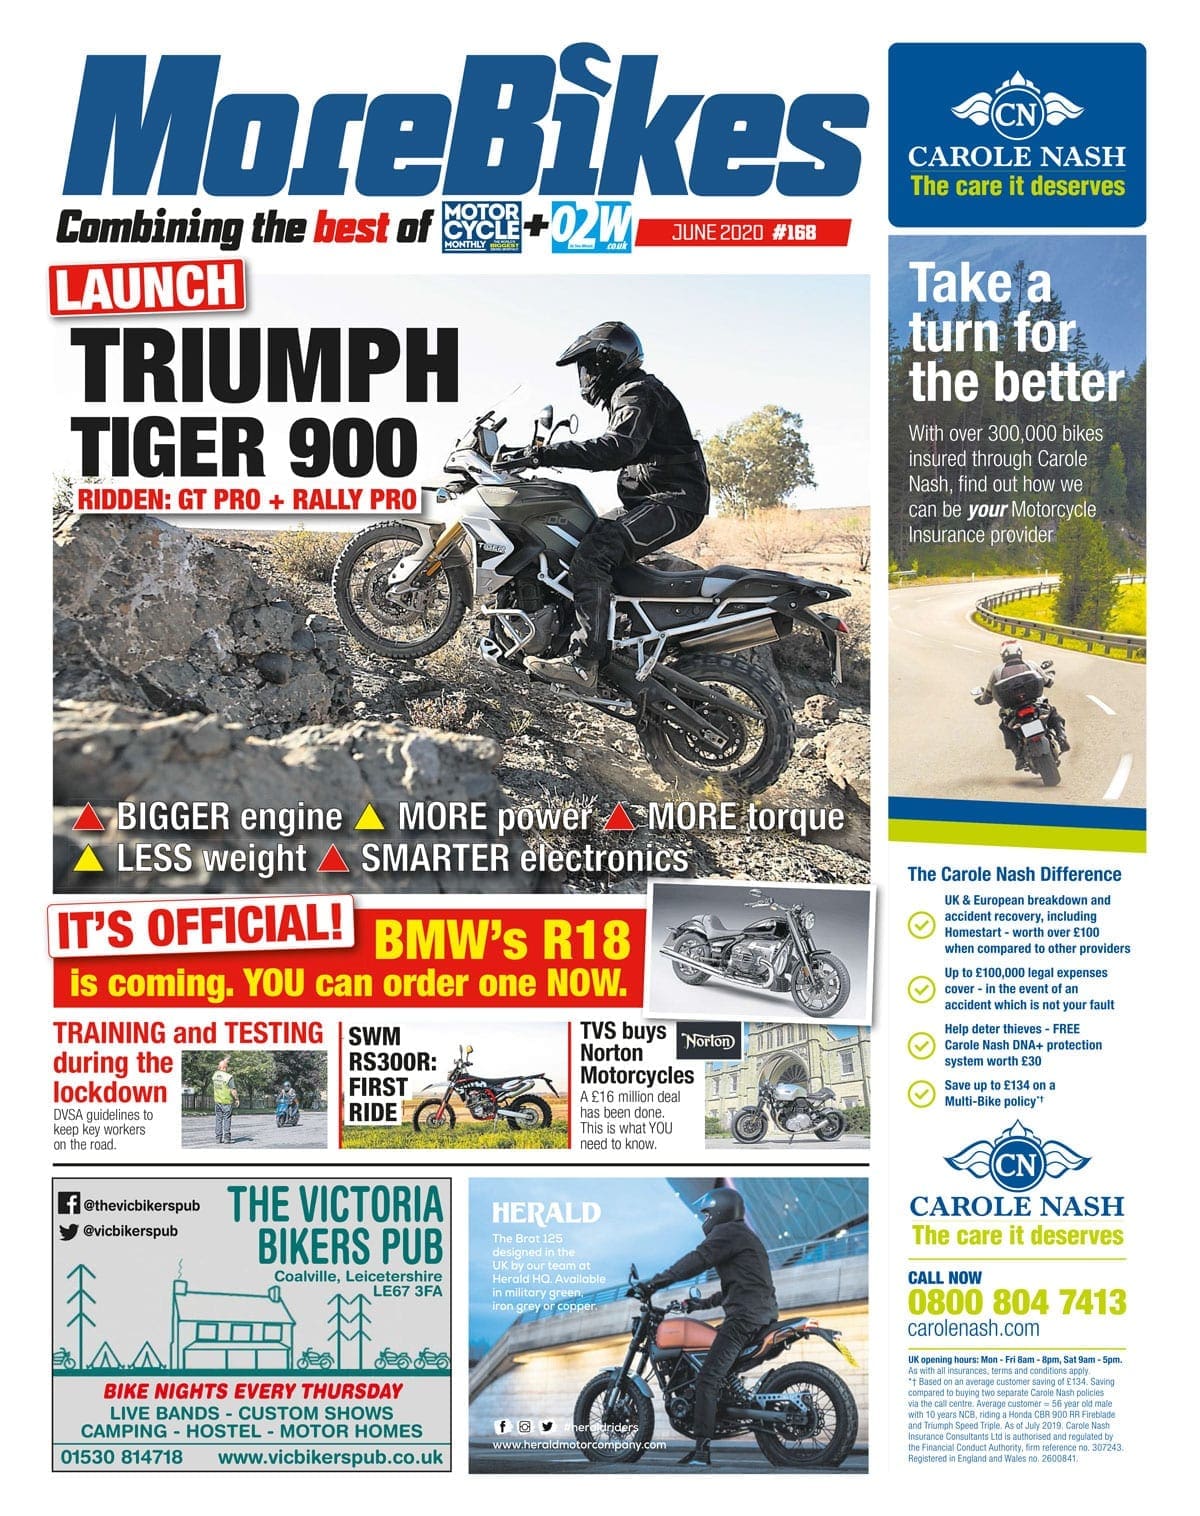 What’s inside the June edition of MoreBikes?